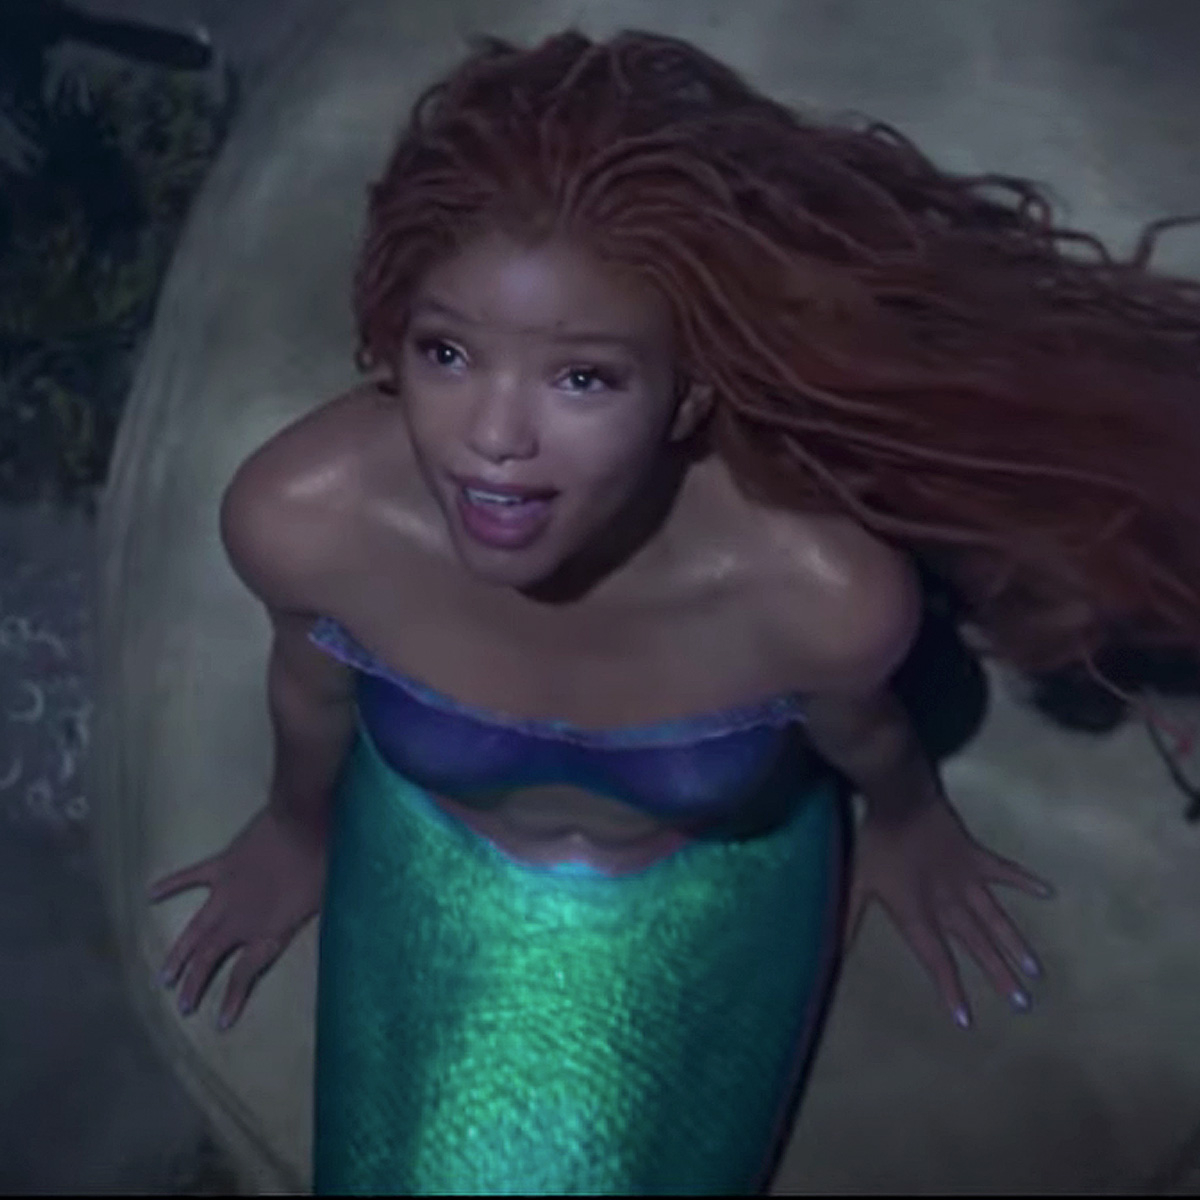 Little Mermaid: Watch Halle Bailey Sing “Part of Your World”